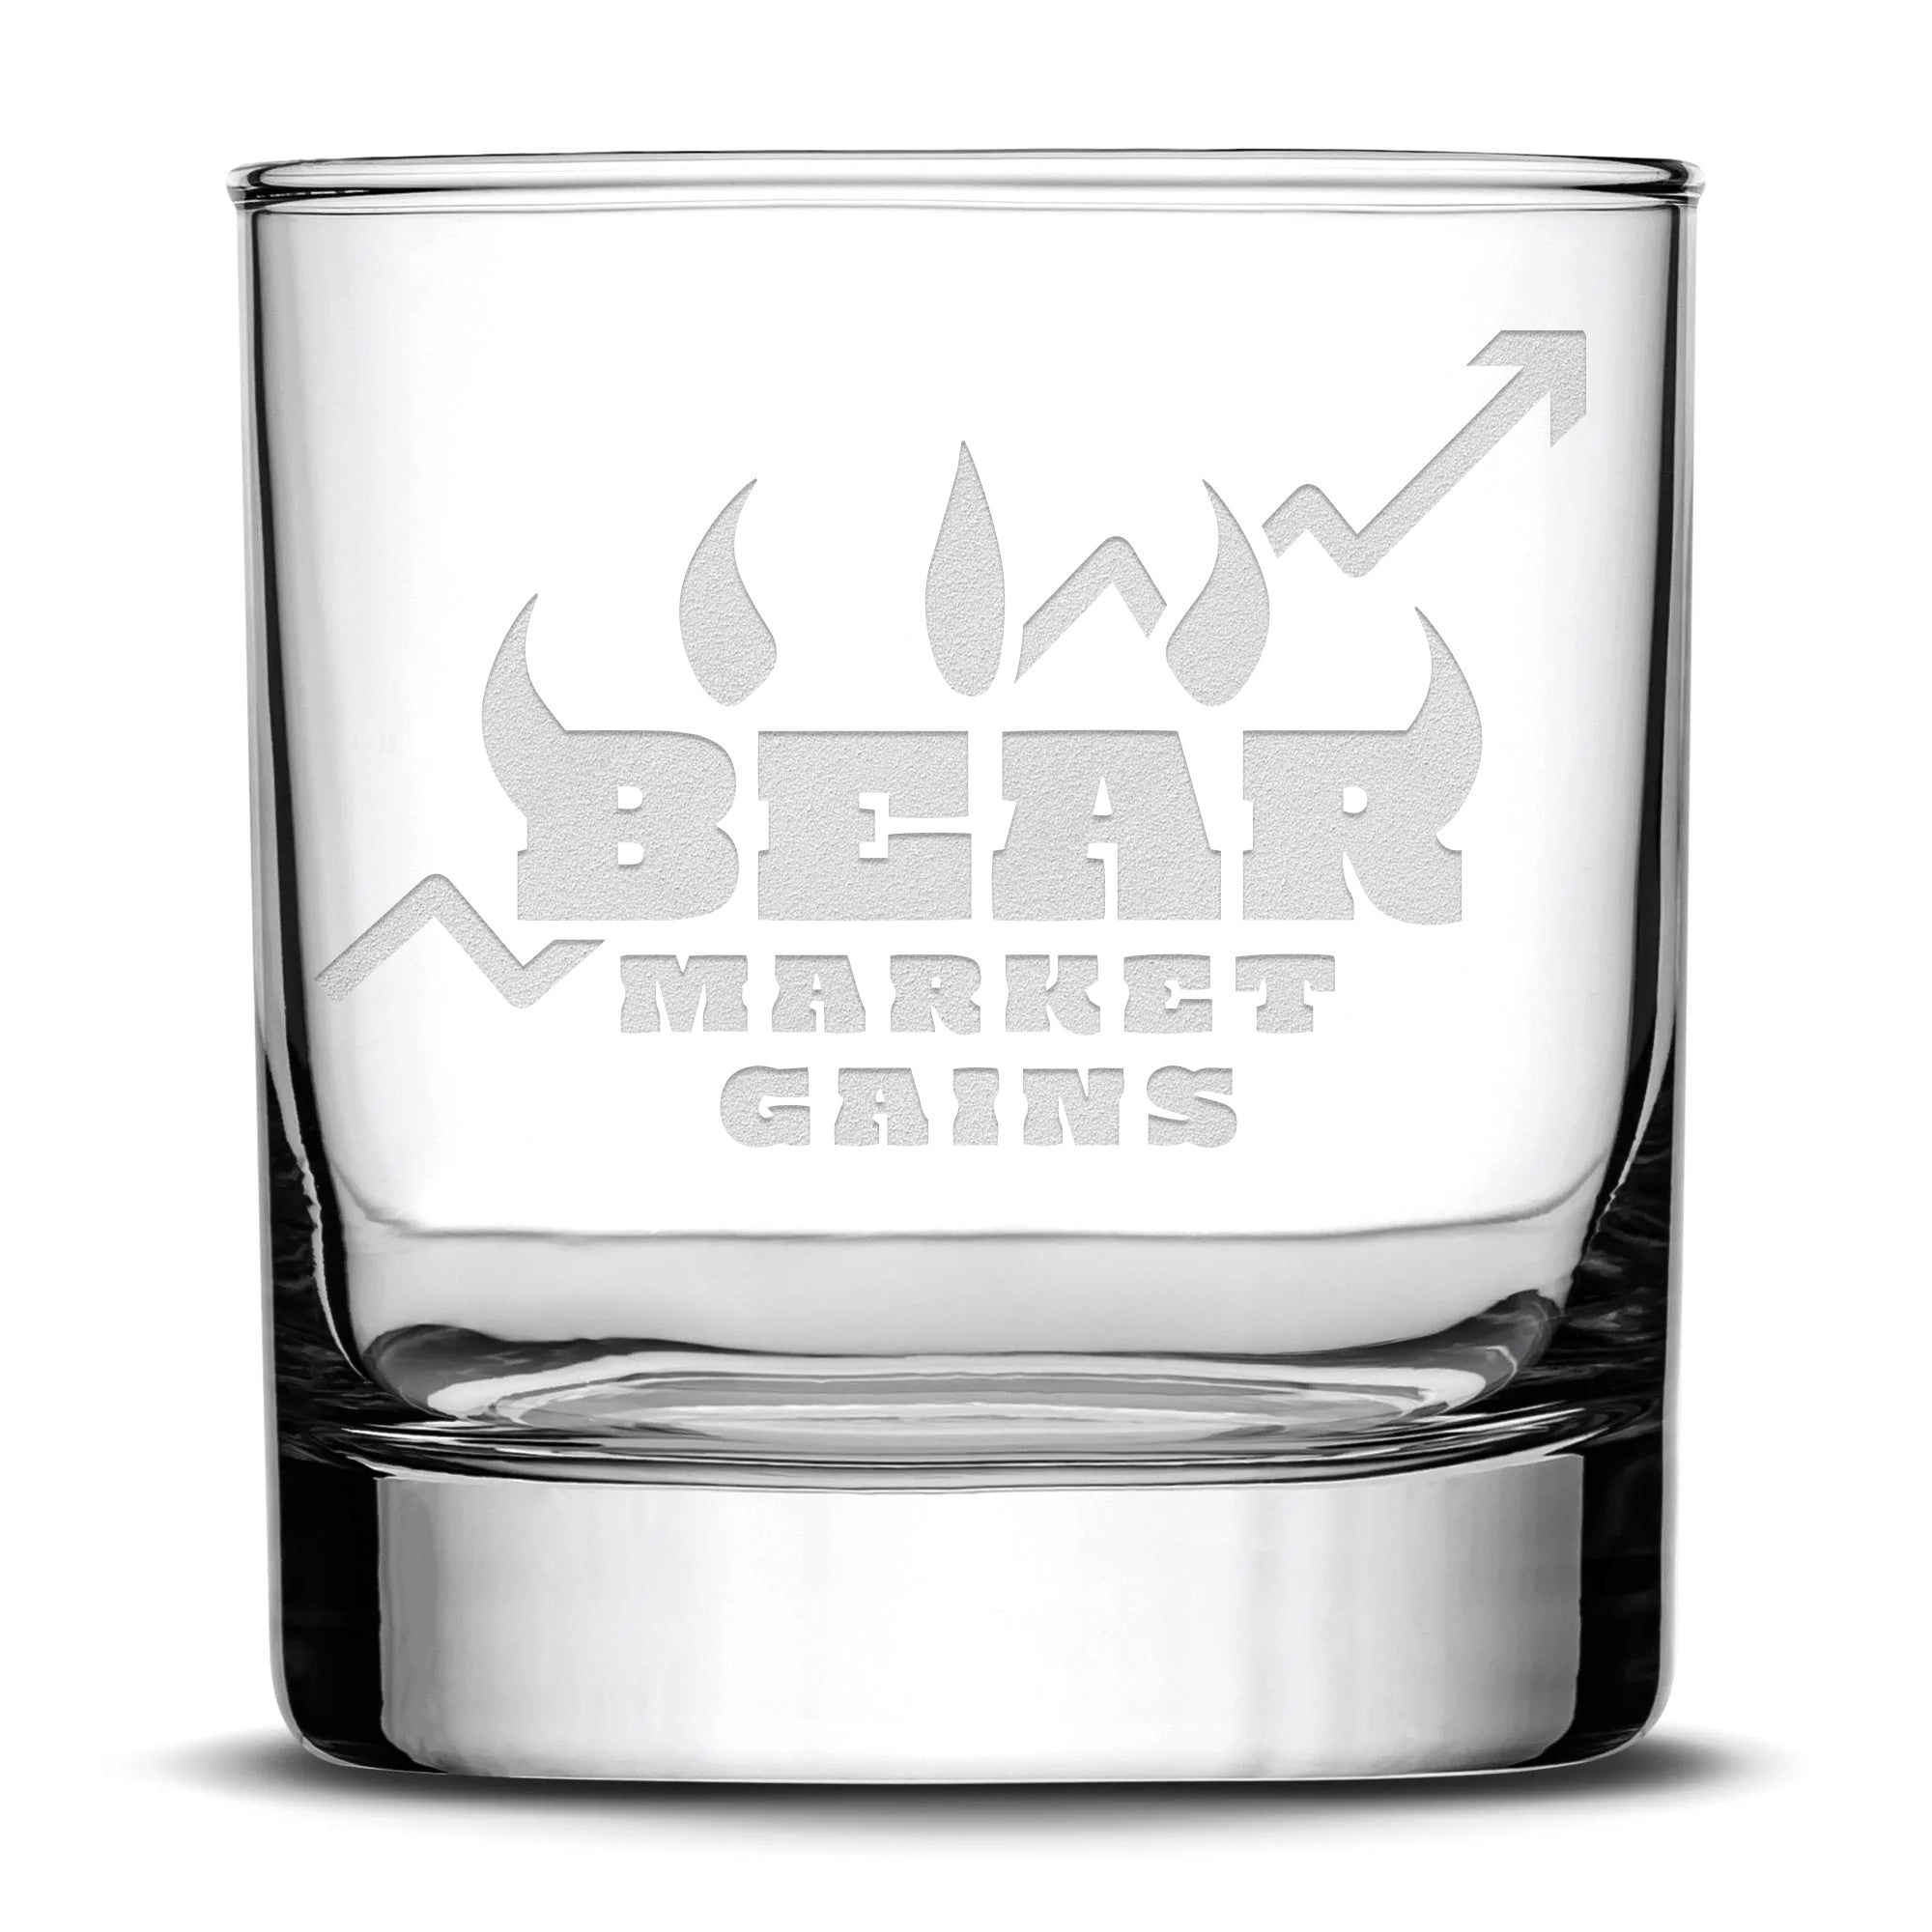 Integrity Bottles Premium, Bear Market Gains, Whiskey Glass, Hand Made in USA, Sand Etched, 11oz